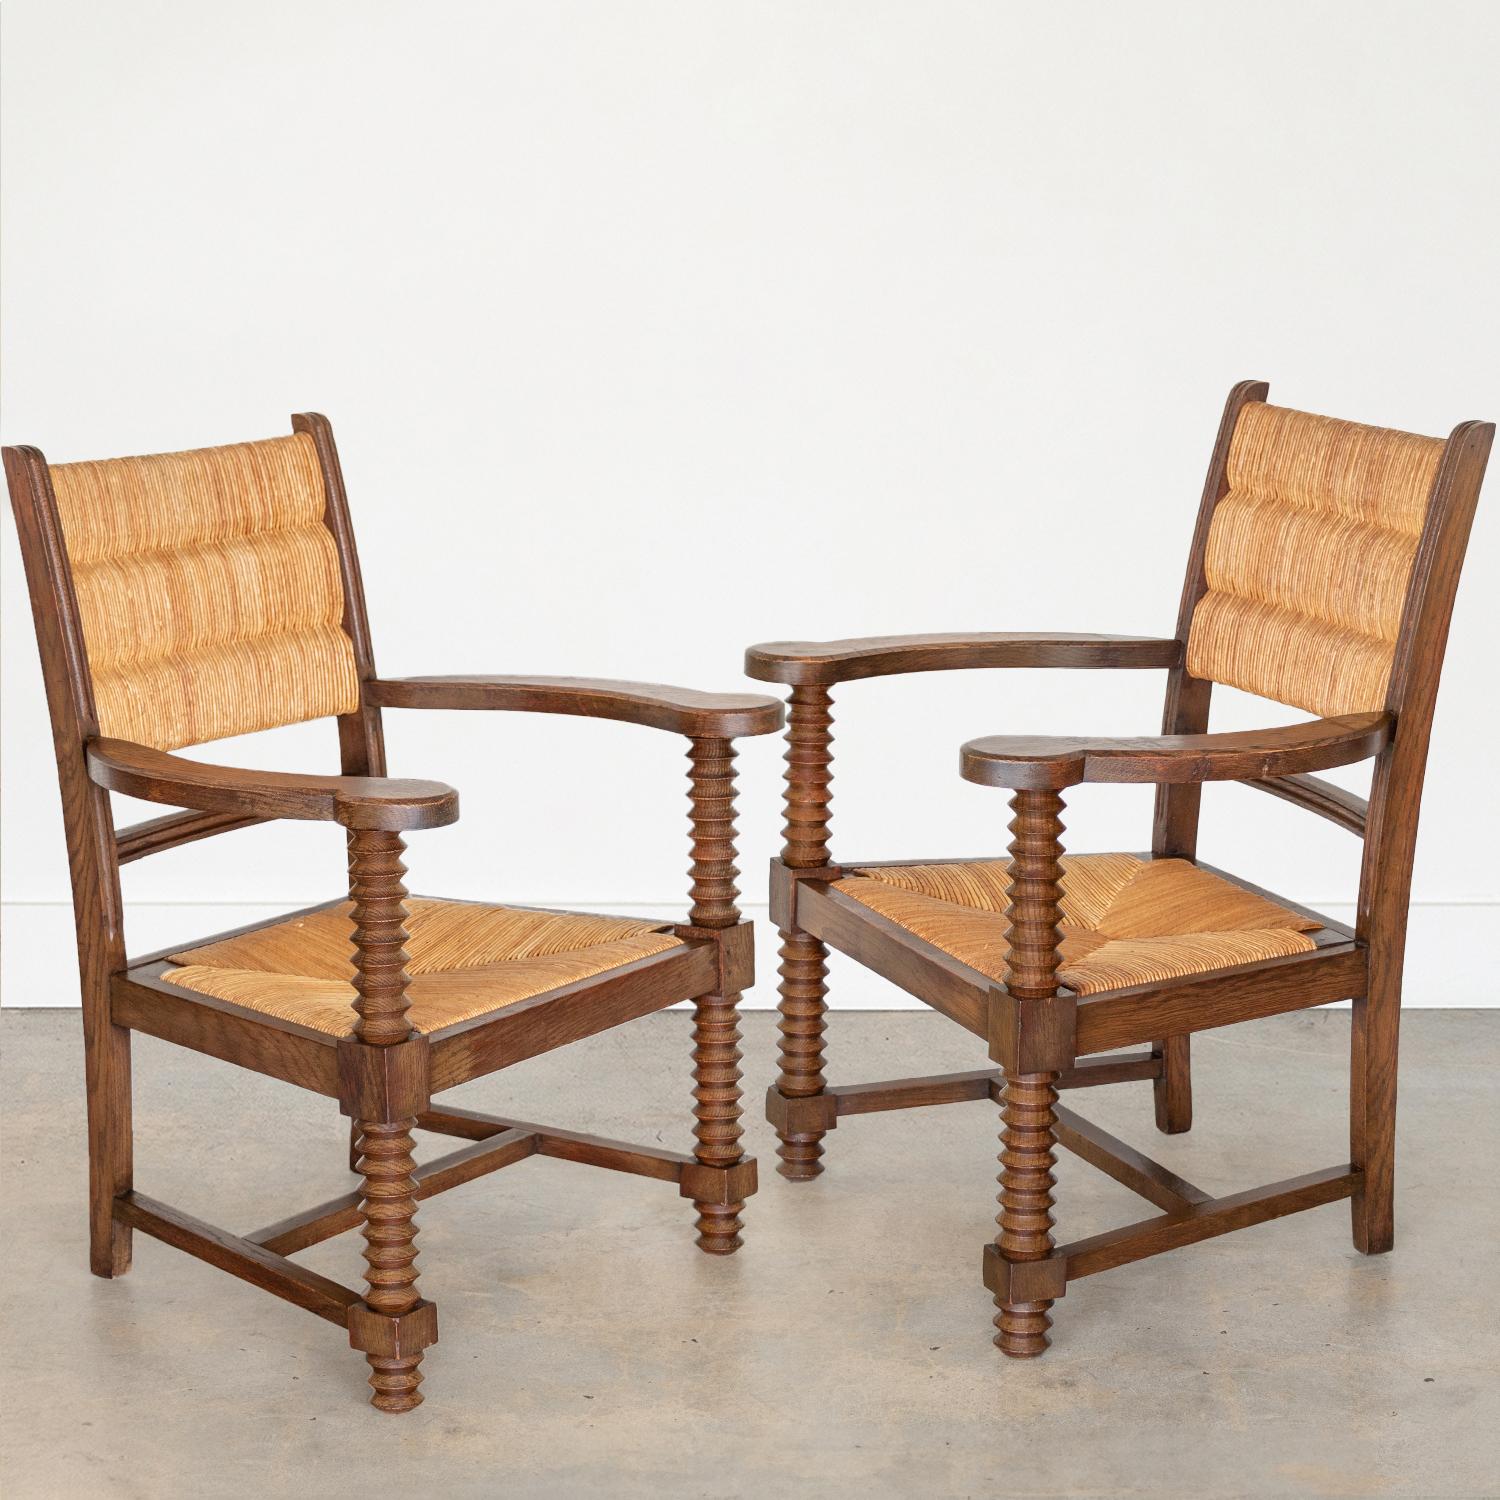 Great pair of carved wood armchairs by Charles Dudouyt from France, 1940s. Beautiful woven rush back and seat. Intricate carved wood detail on arms, legs, and wood frame with dark stain. Sold as a pair.